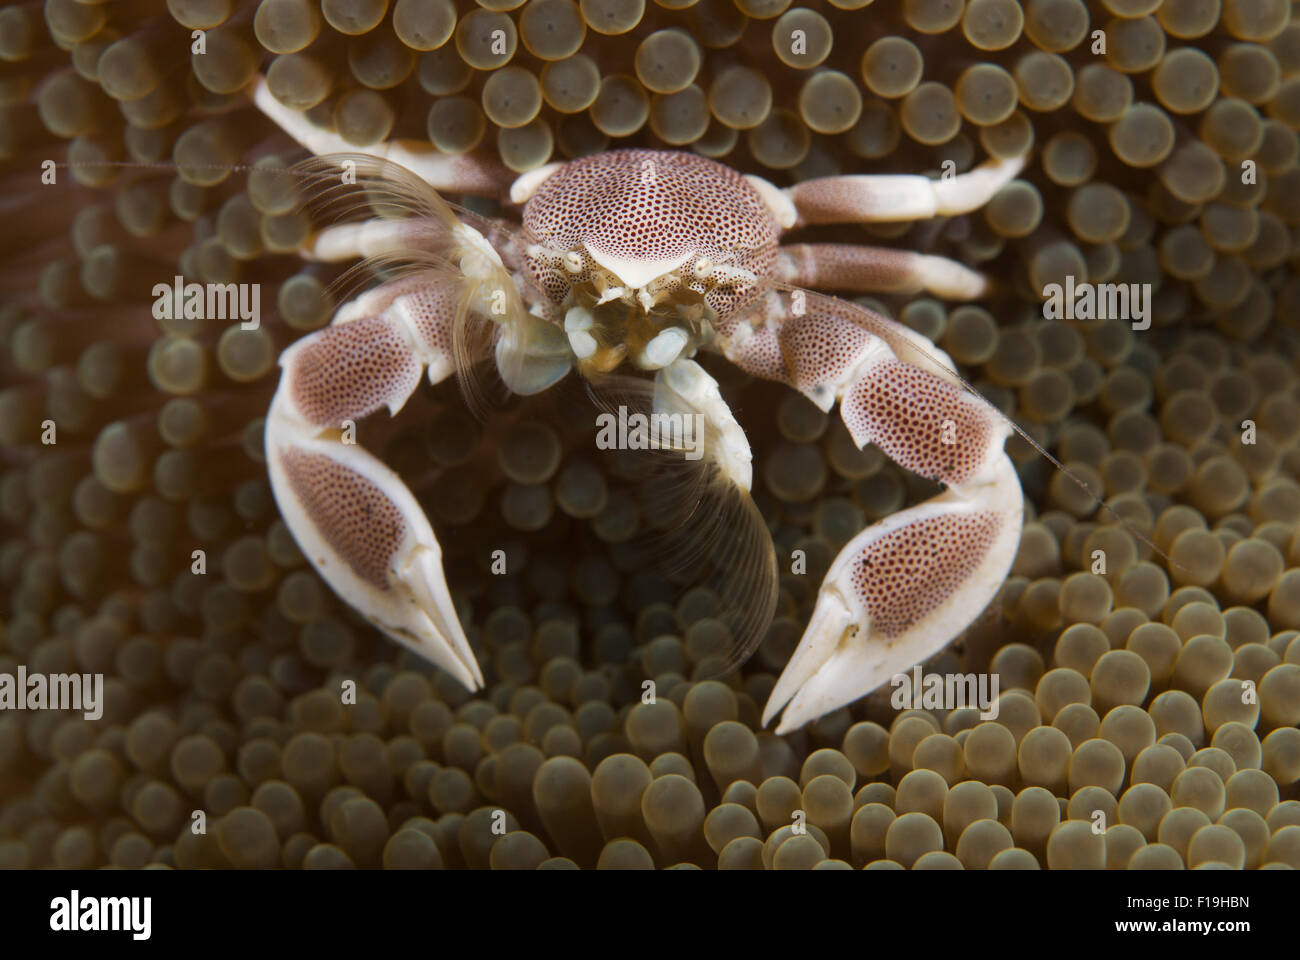 px8578-D. Porcelain Crab (Neopetrolisthes maculatus) feeding. Feathery 'mitts' catch drifting plant and animal matter. Indonesia Stock Photo